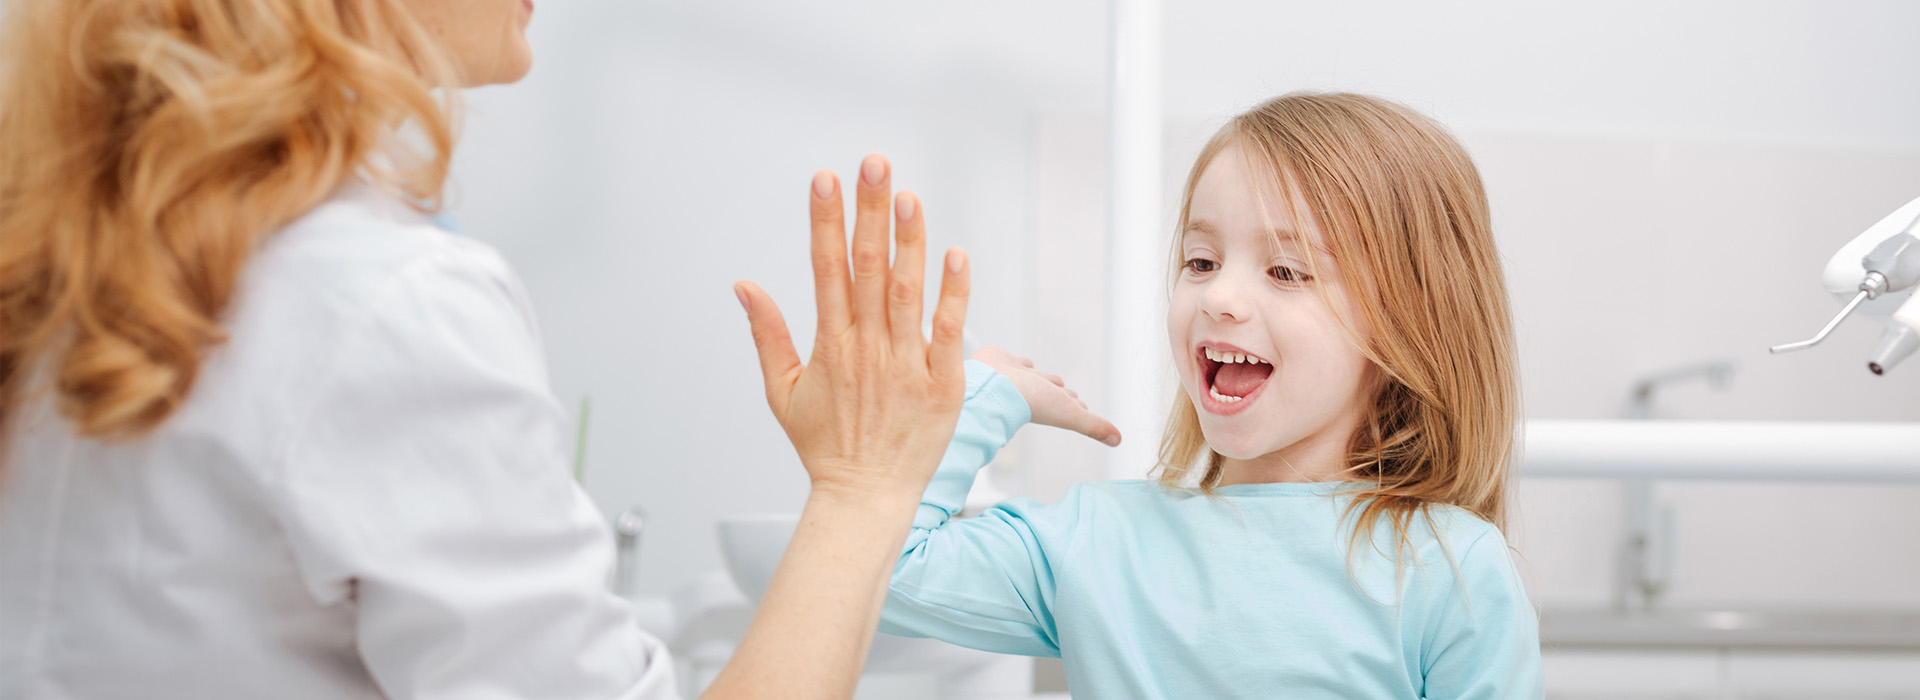 A woman and a young girl in a bathroom, with the woman gesturing towards the child.